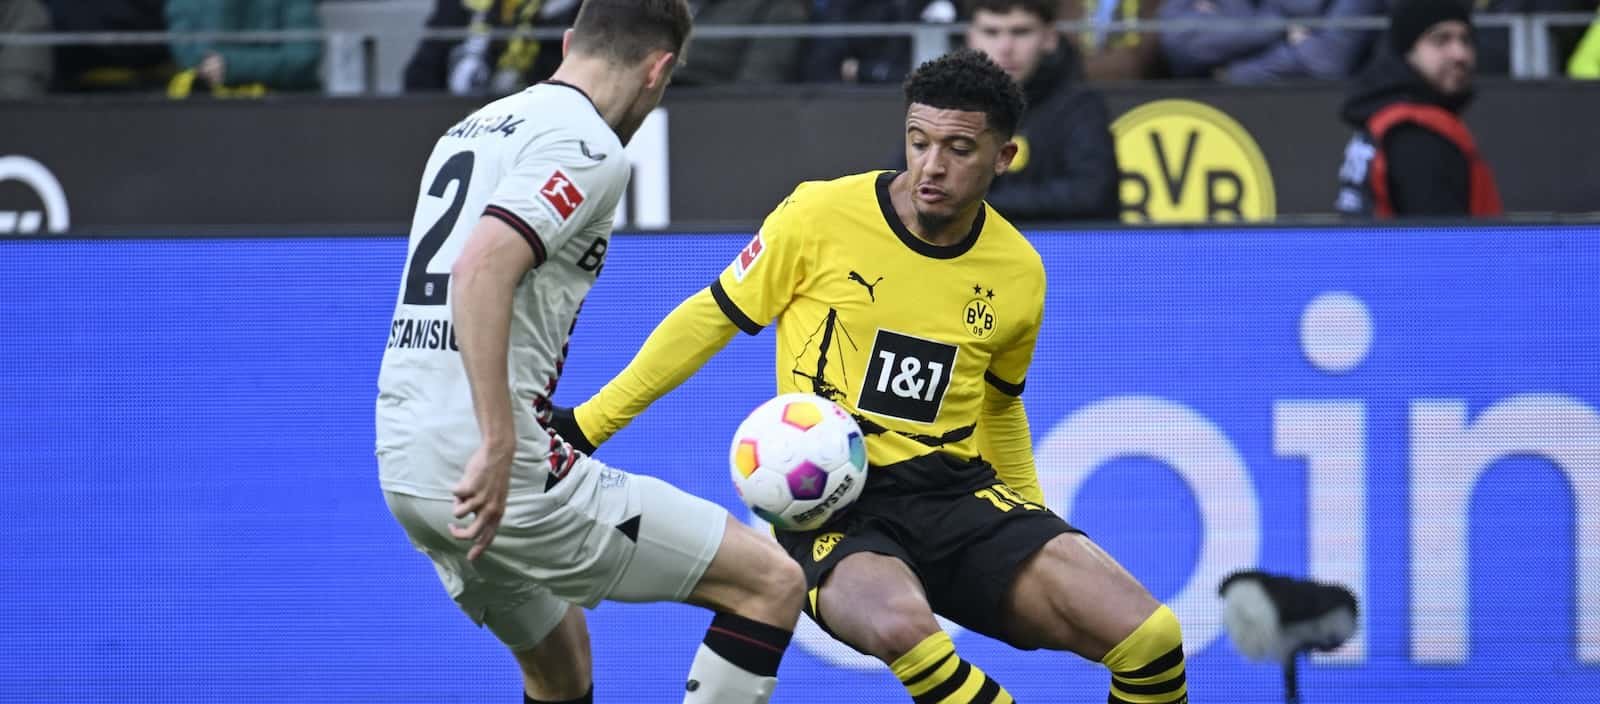 Jadon Sancho stifled as Borussia Dortmund are forced to settle for draw vs. Bayer Leverkusen – Man United News And Transfer News